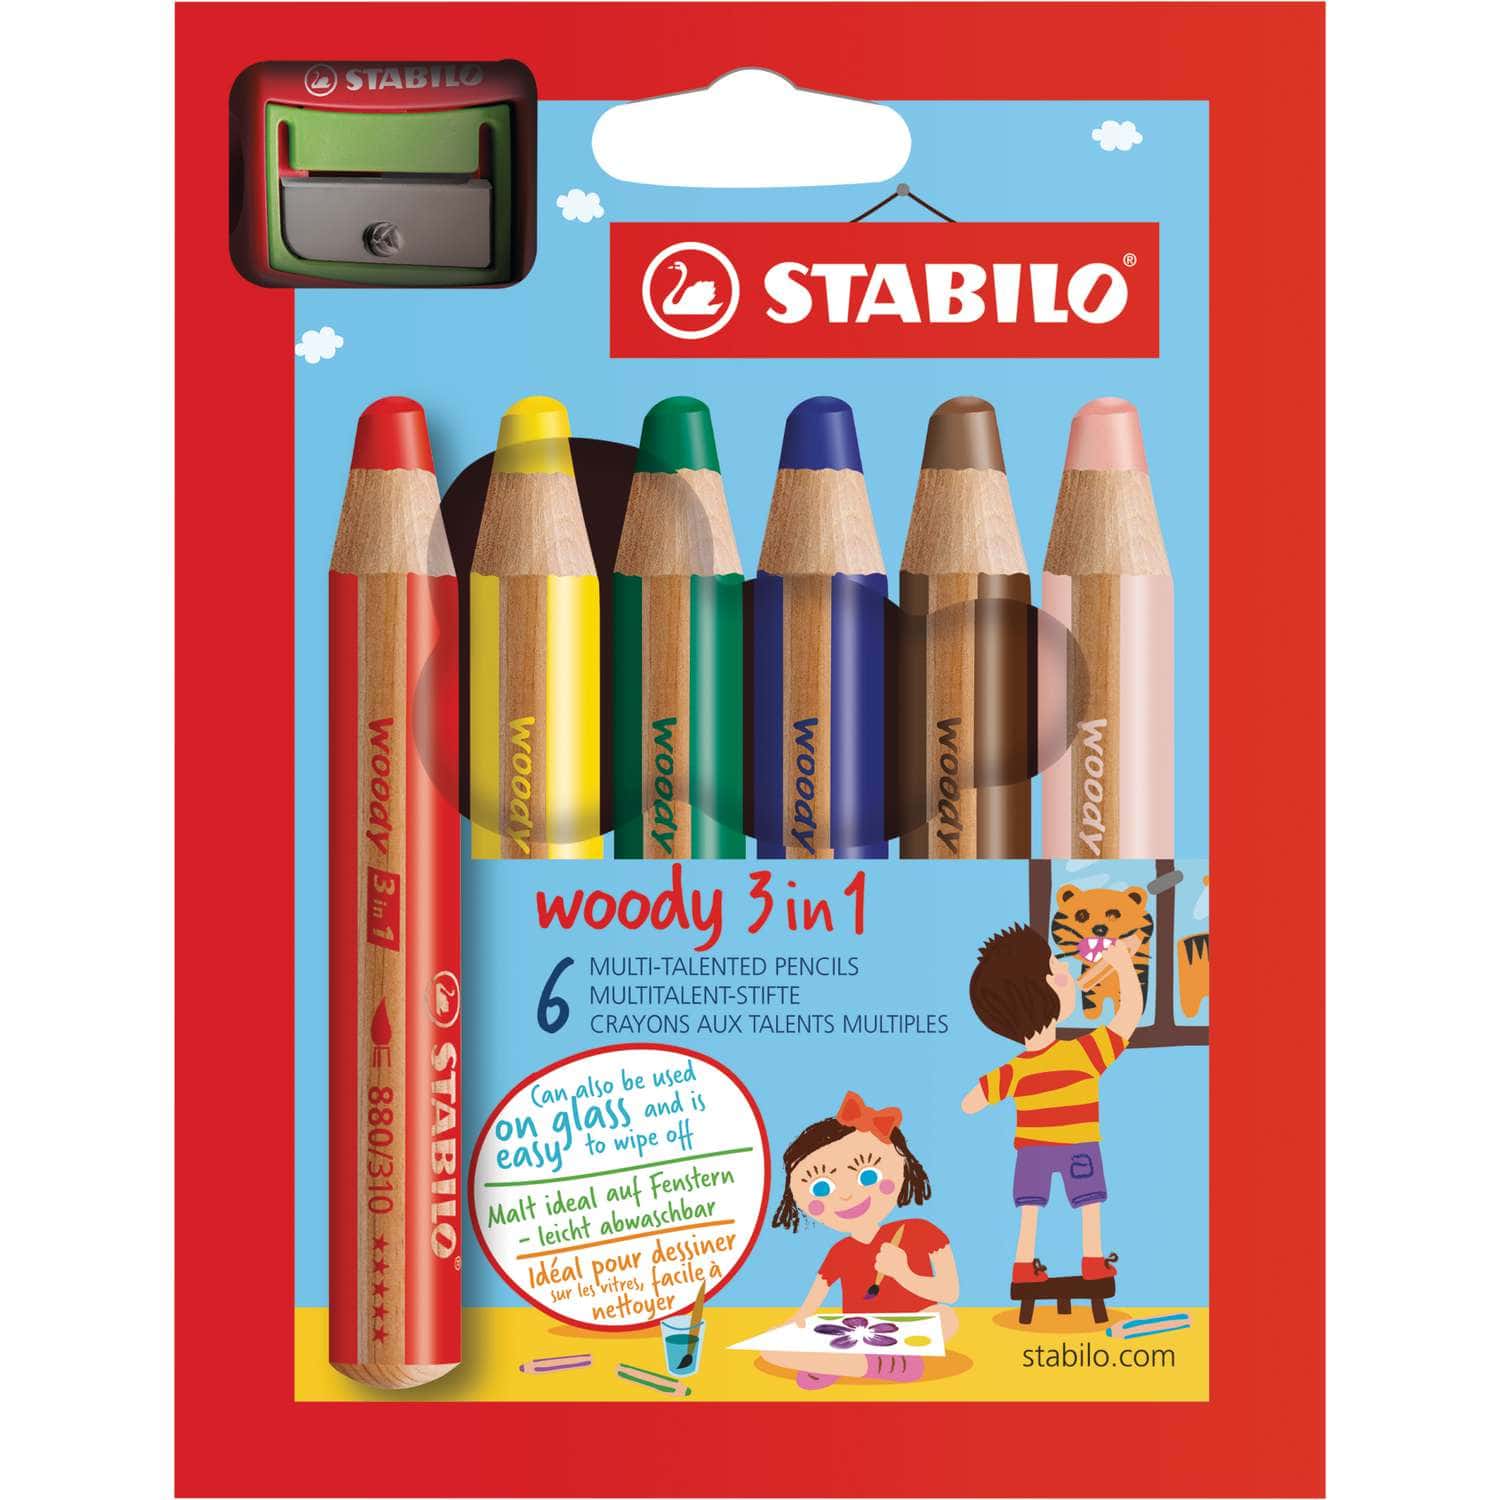 Taille-crayon STABILO woody 3in1 - Matériel dessin